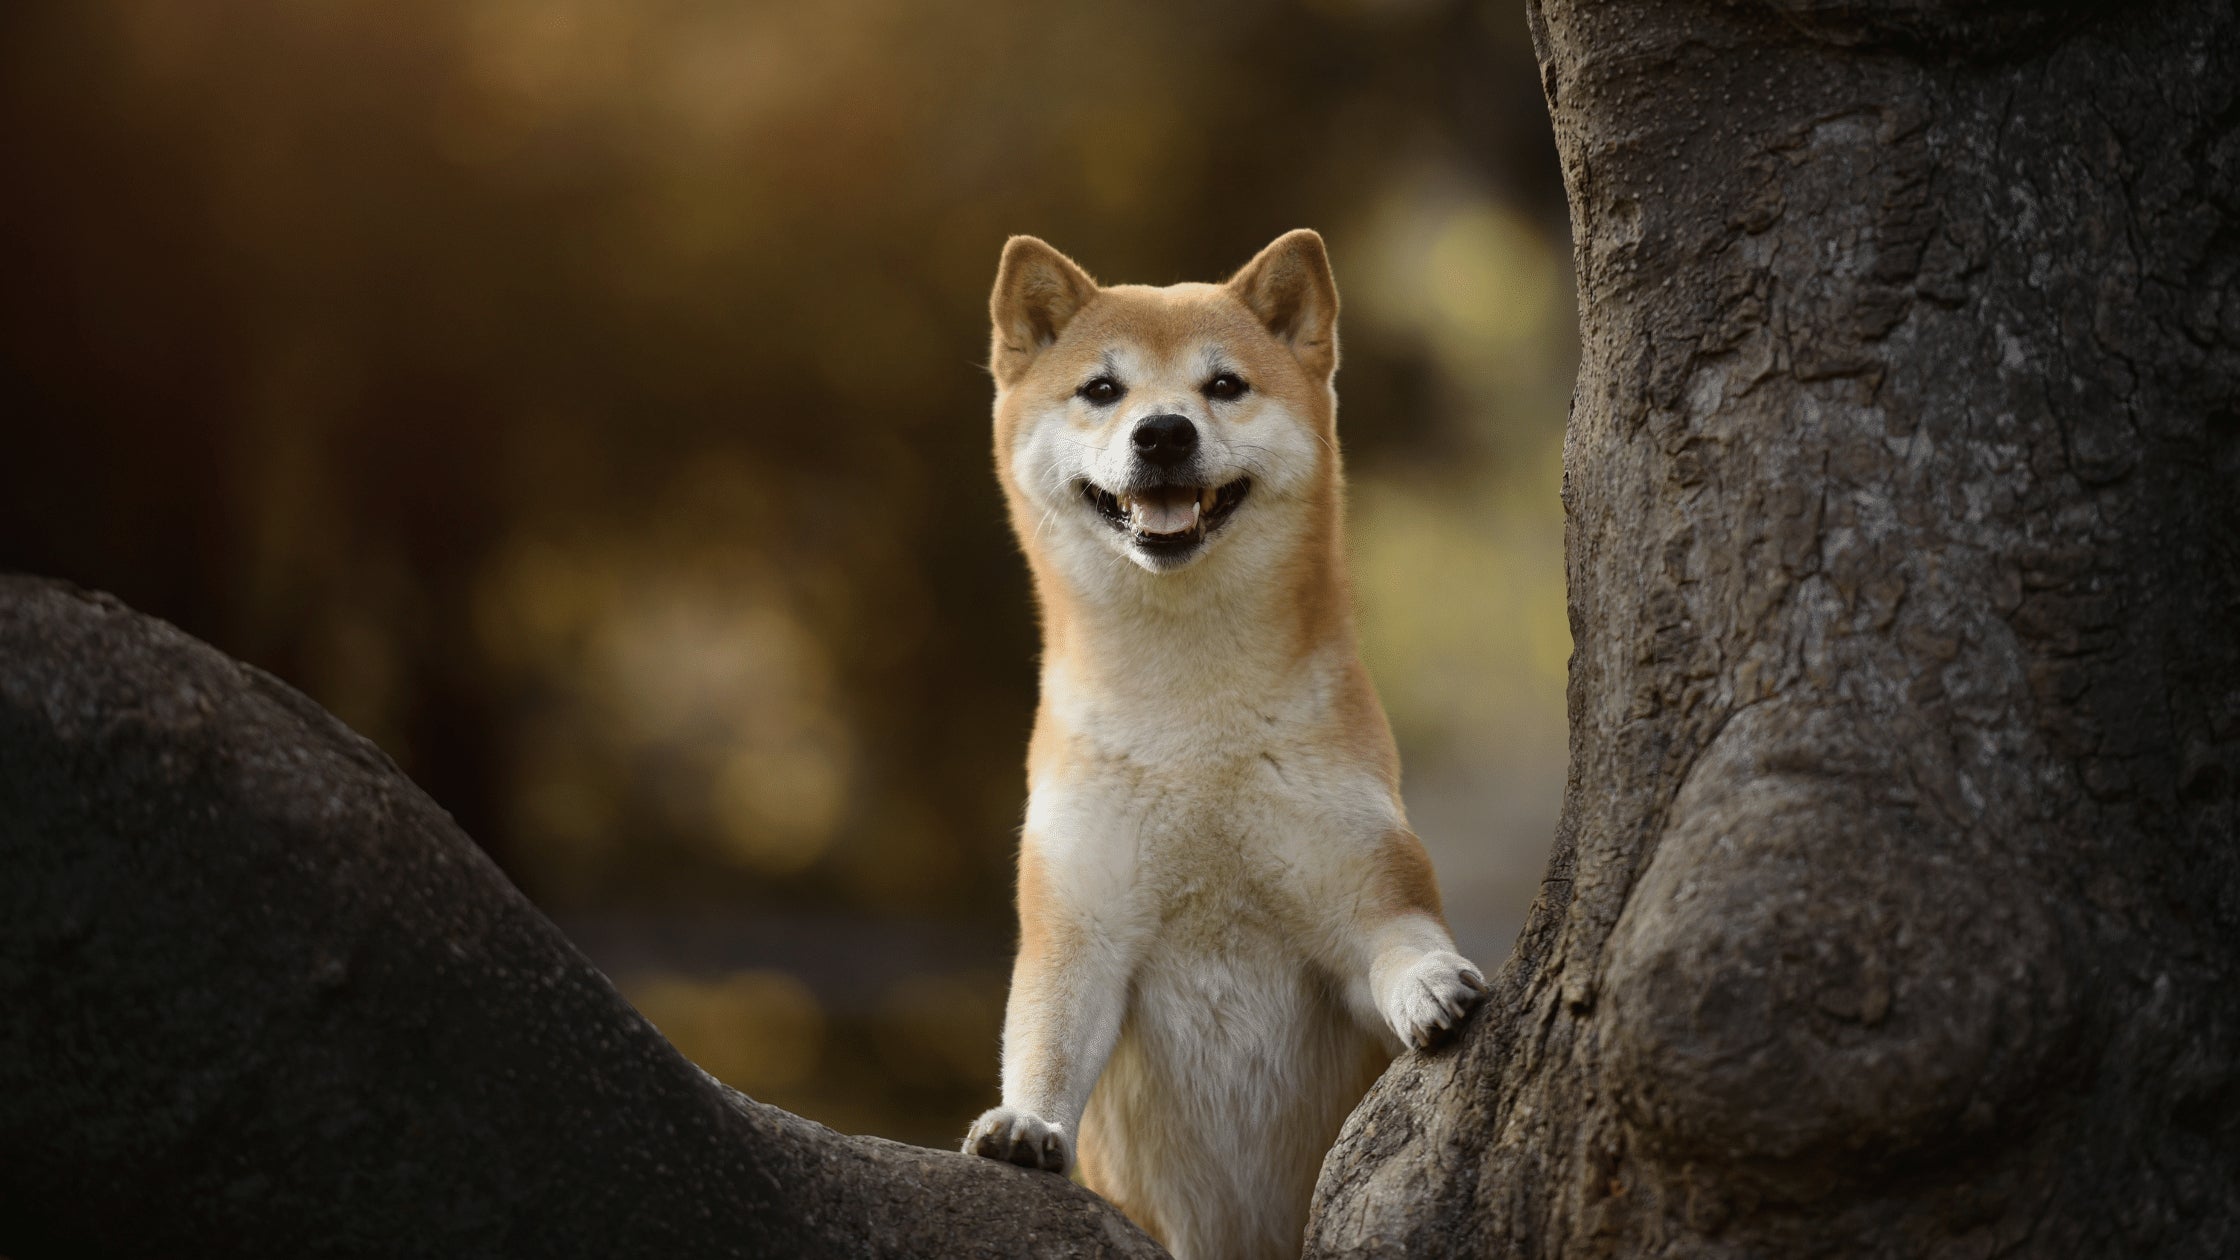 The Famous and Heartwarming Story about a Dog Named Hachiko